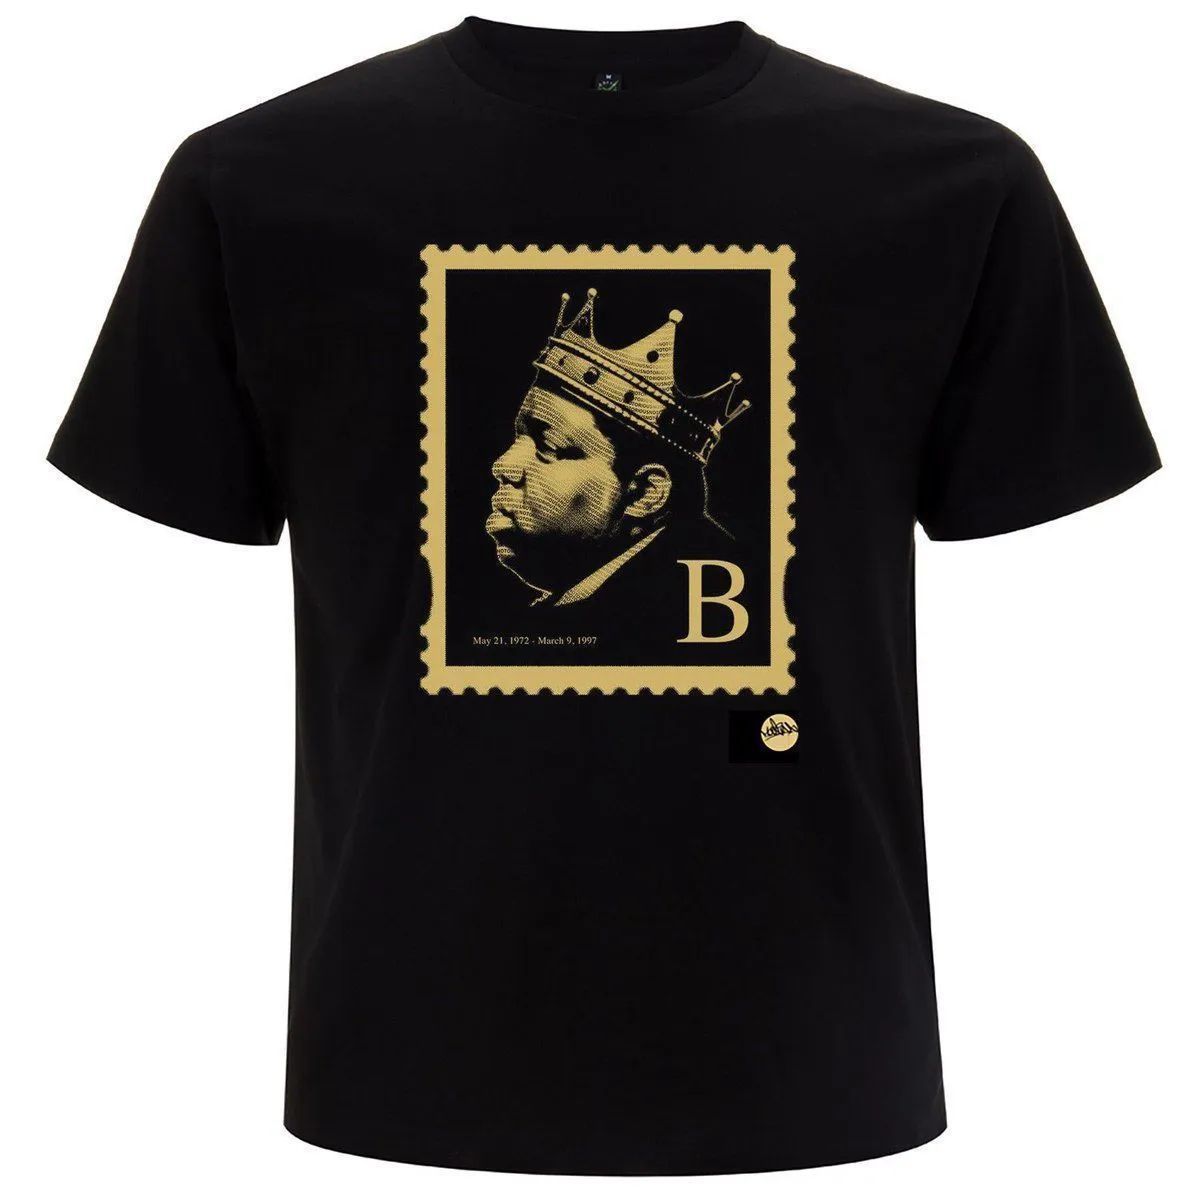 THE CLEARANCE SALE! NOW UP TO 50% OFF PRODUCTS VISIT THE WEBSITE AND GRAB YOURSELF A BARGAIN! LOW STOCK! The Illest! Biggie Smalls ‘B’ Stamp T-Shirt madina.co.uk/shop/latest/bi… #hiphop #biggiesmalls #notoriousBig